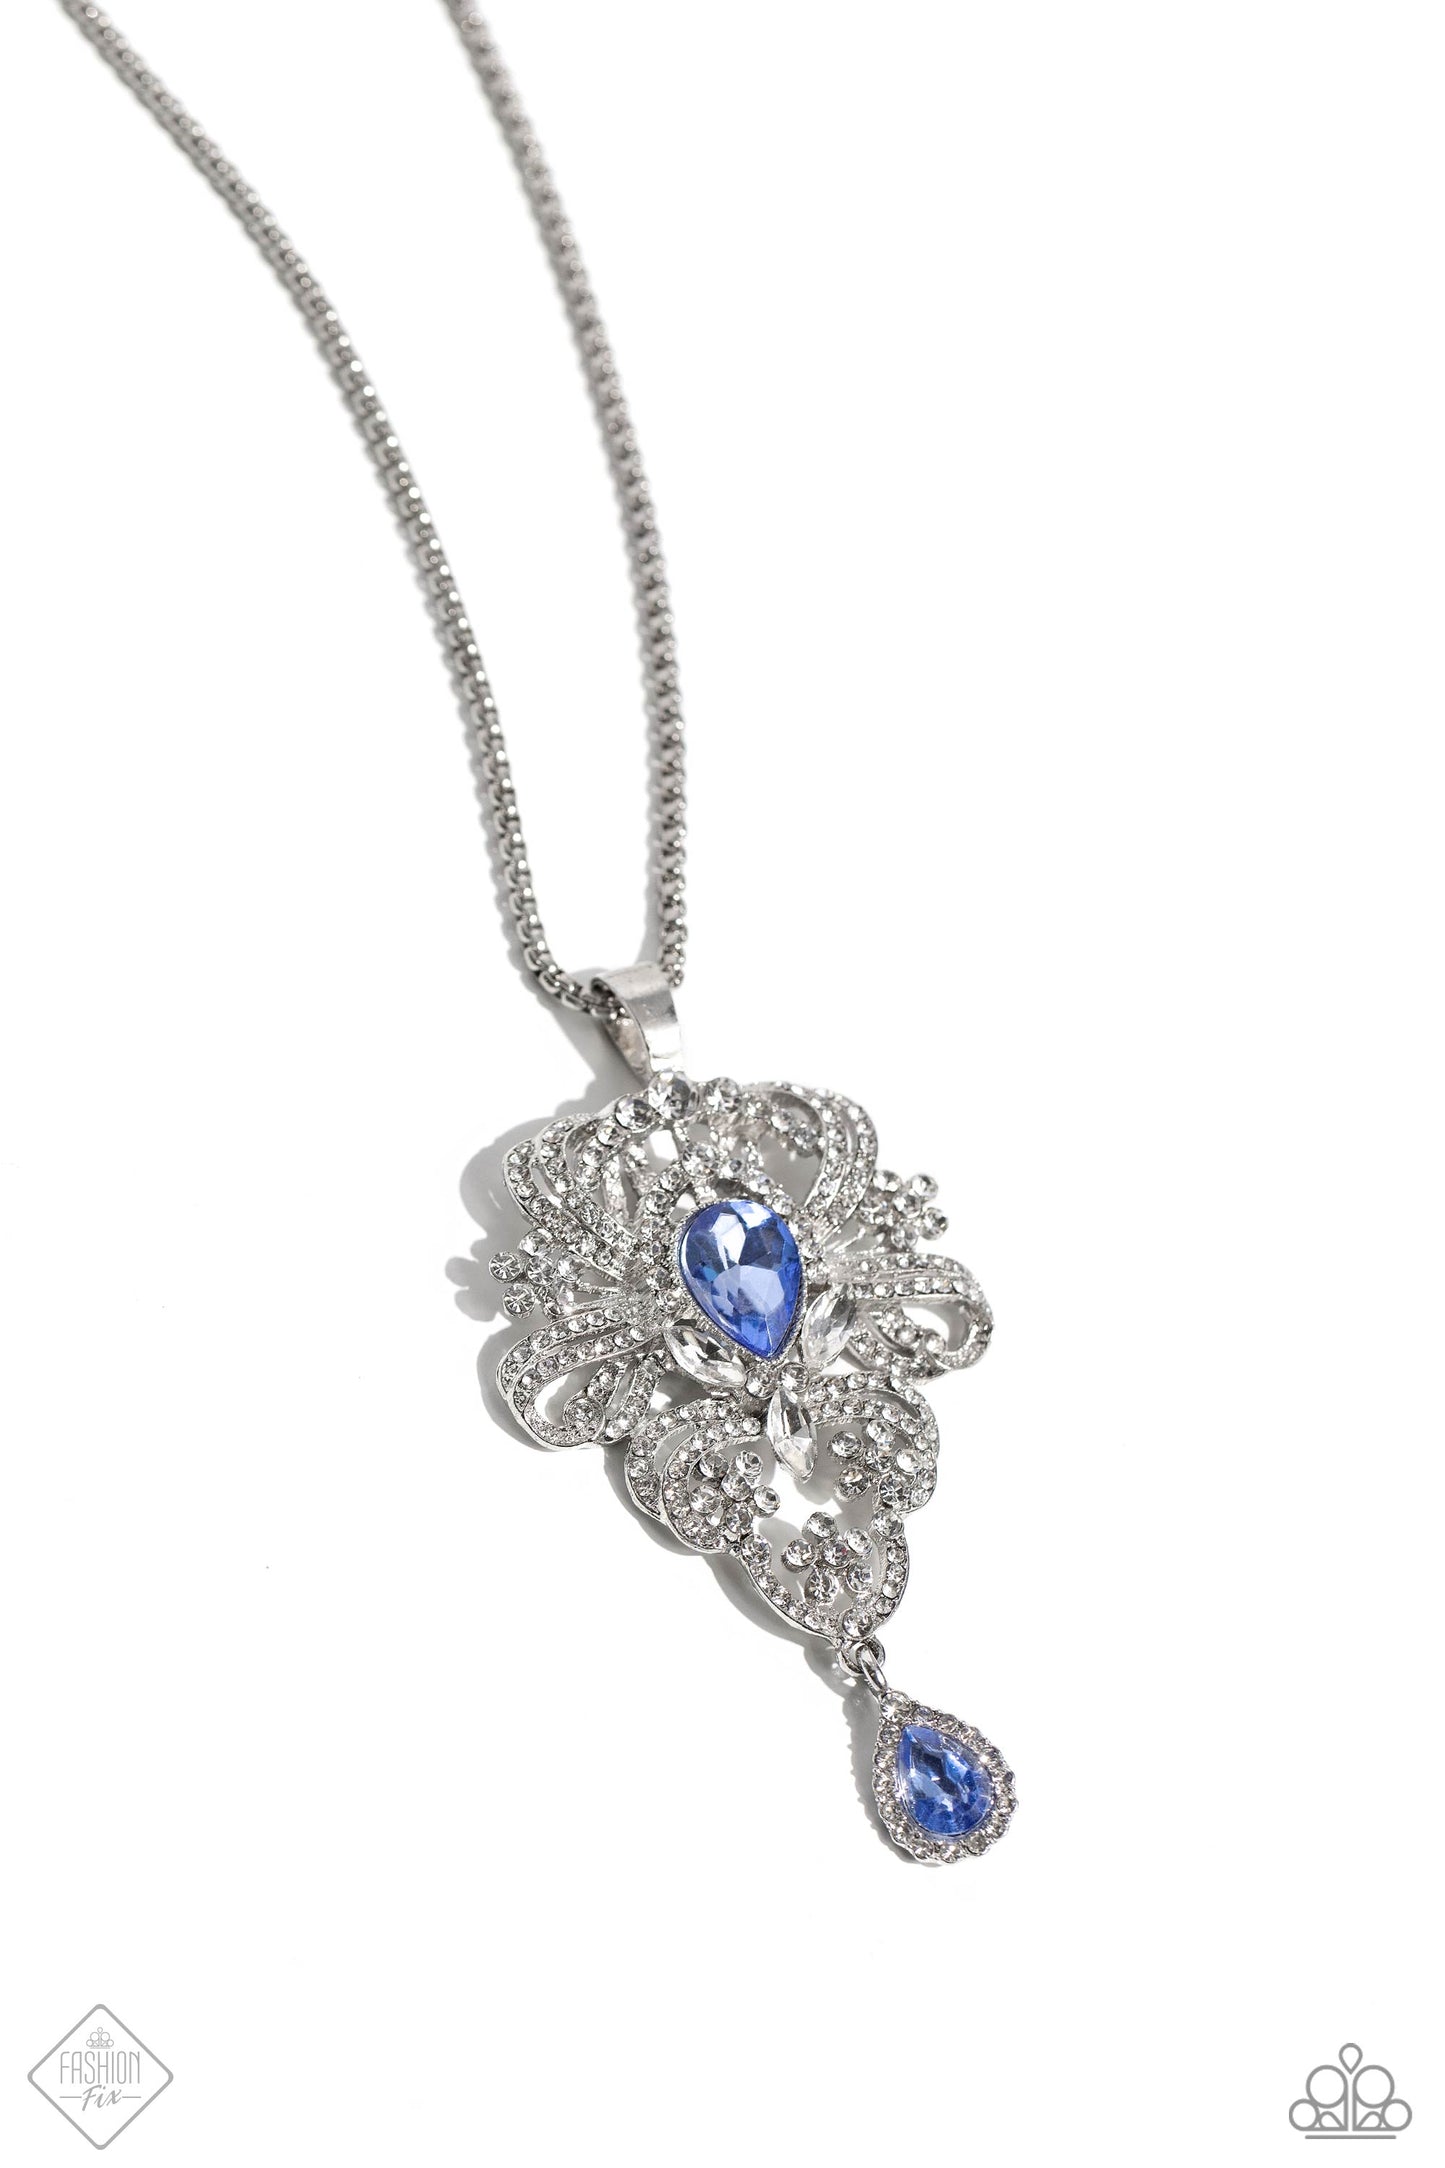 Elegance Personified - Blue Stone Necklace Set